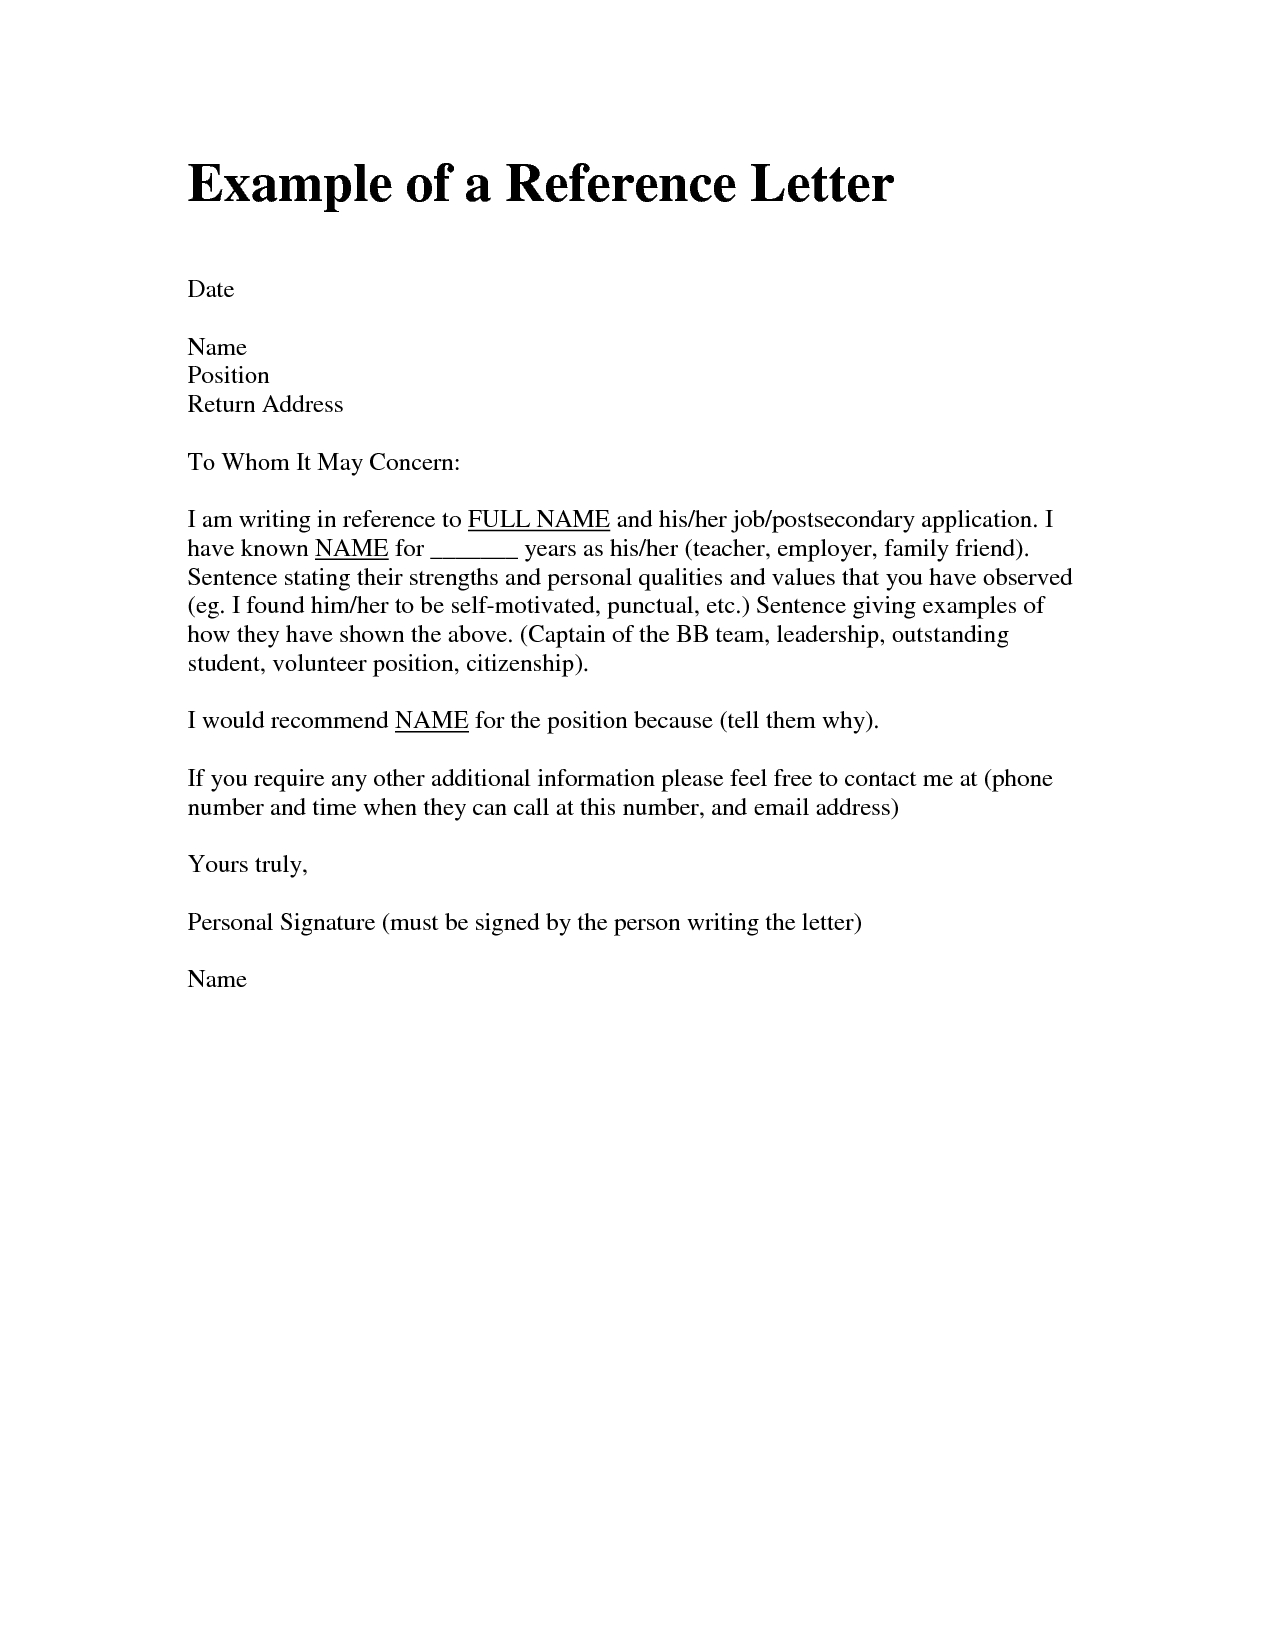 Recommendation Letter Template For A Friend Debandje within size 1275 X 1650